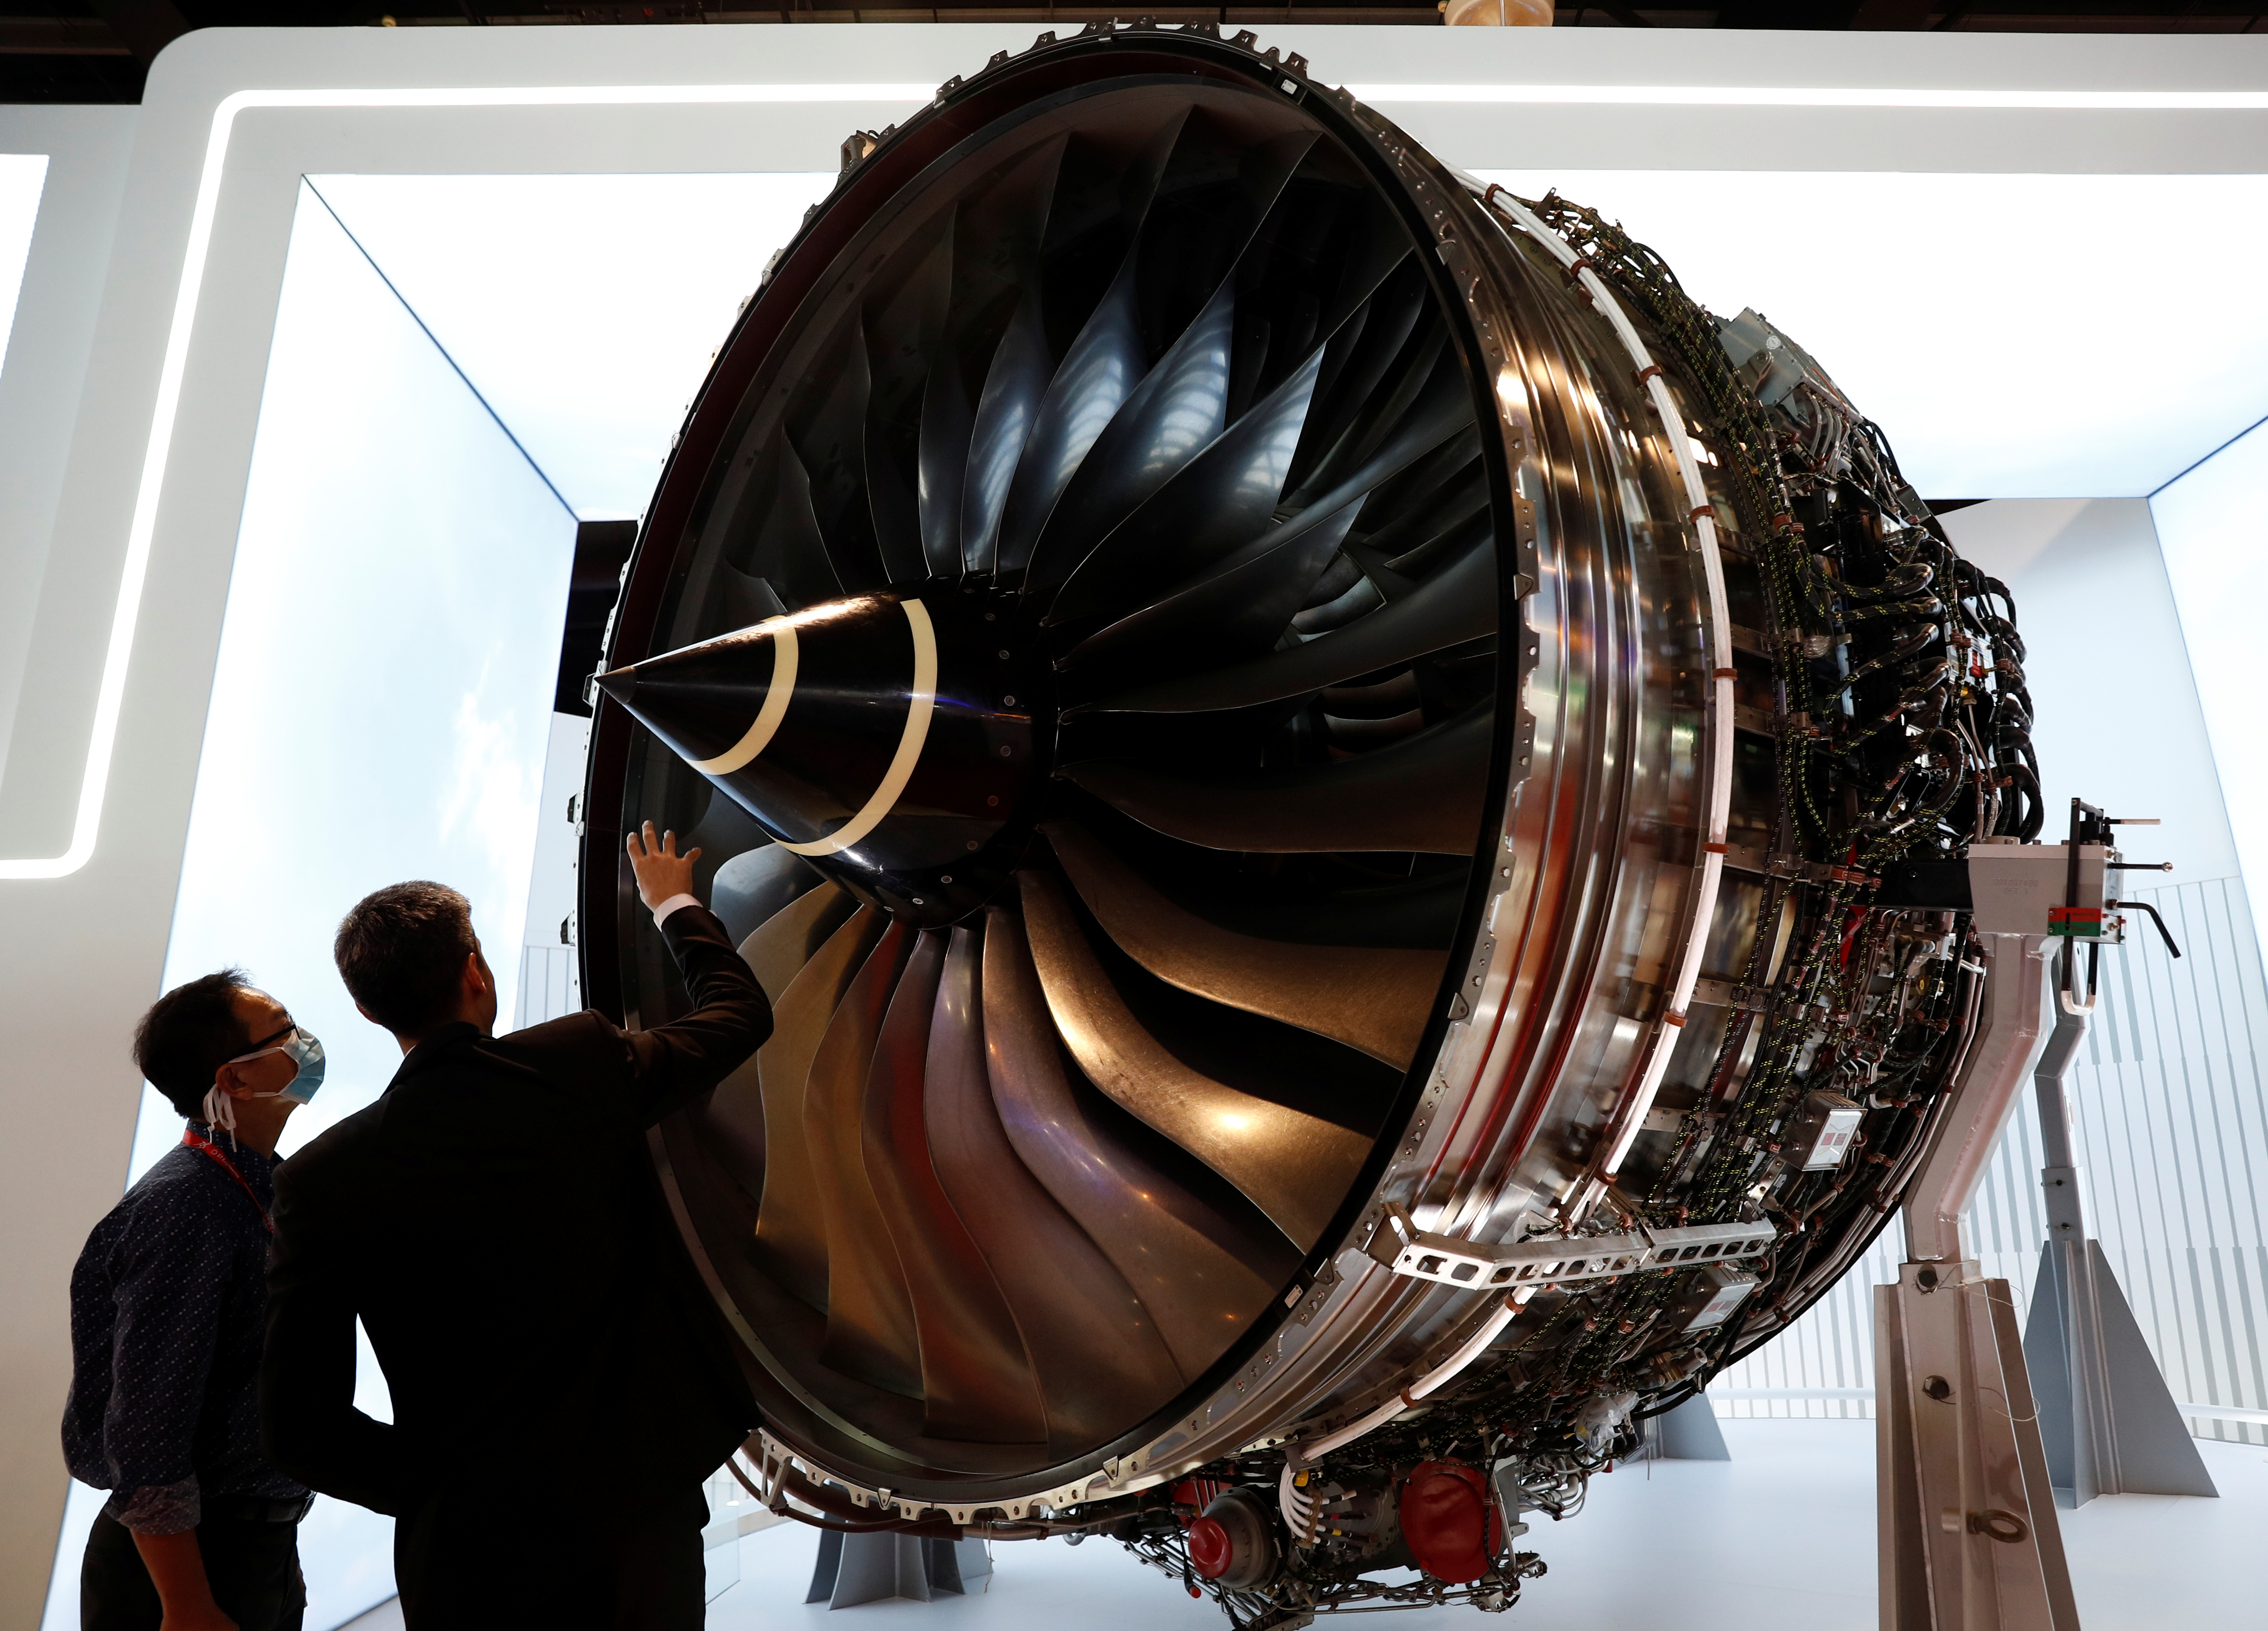 A man looks at Rolls Royce's Trent Engine displayed at the Singapore Airshow in Singapore